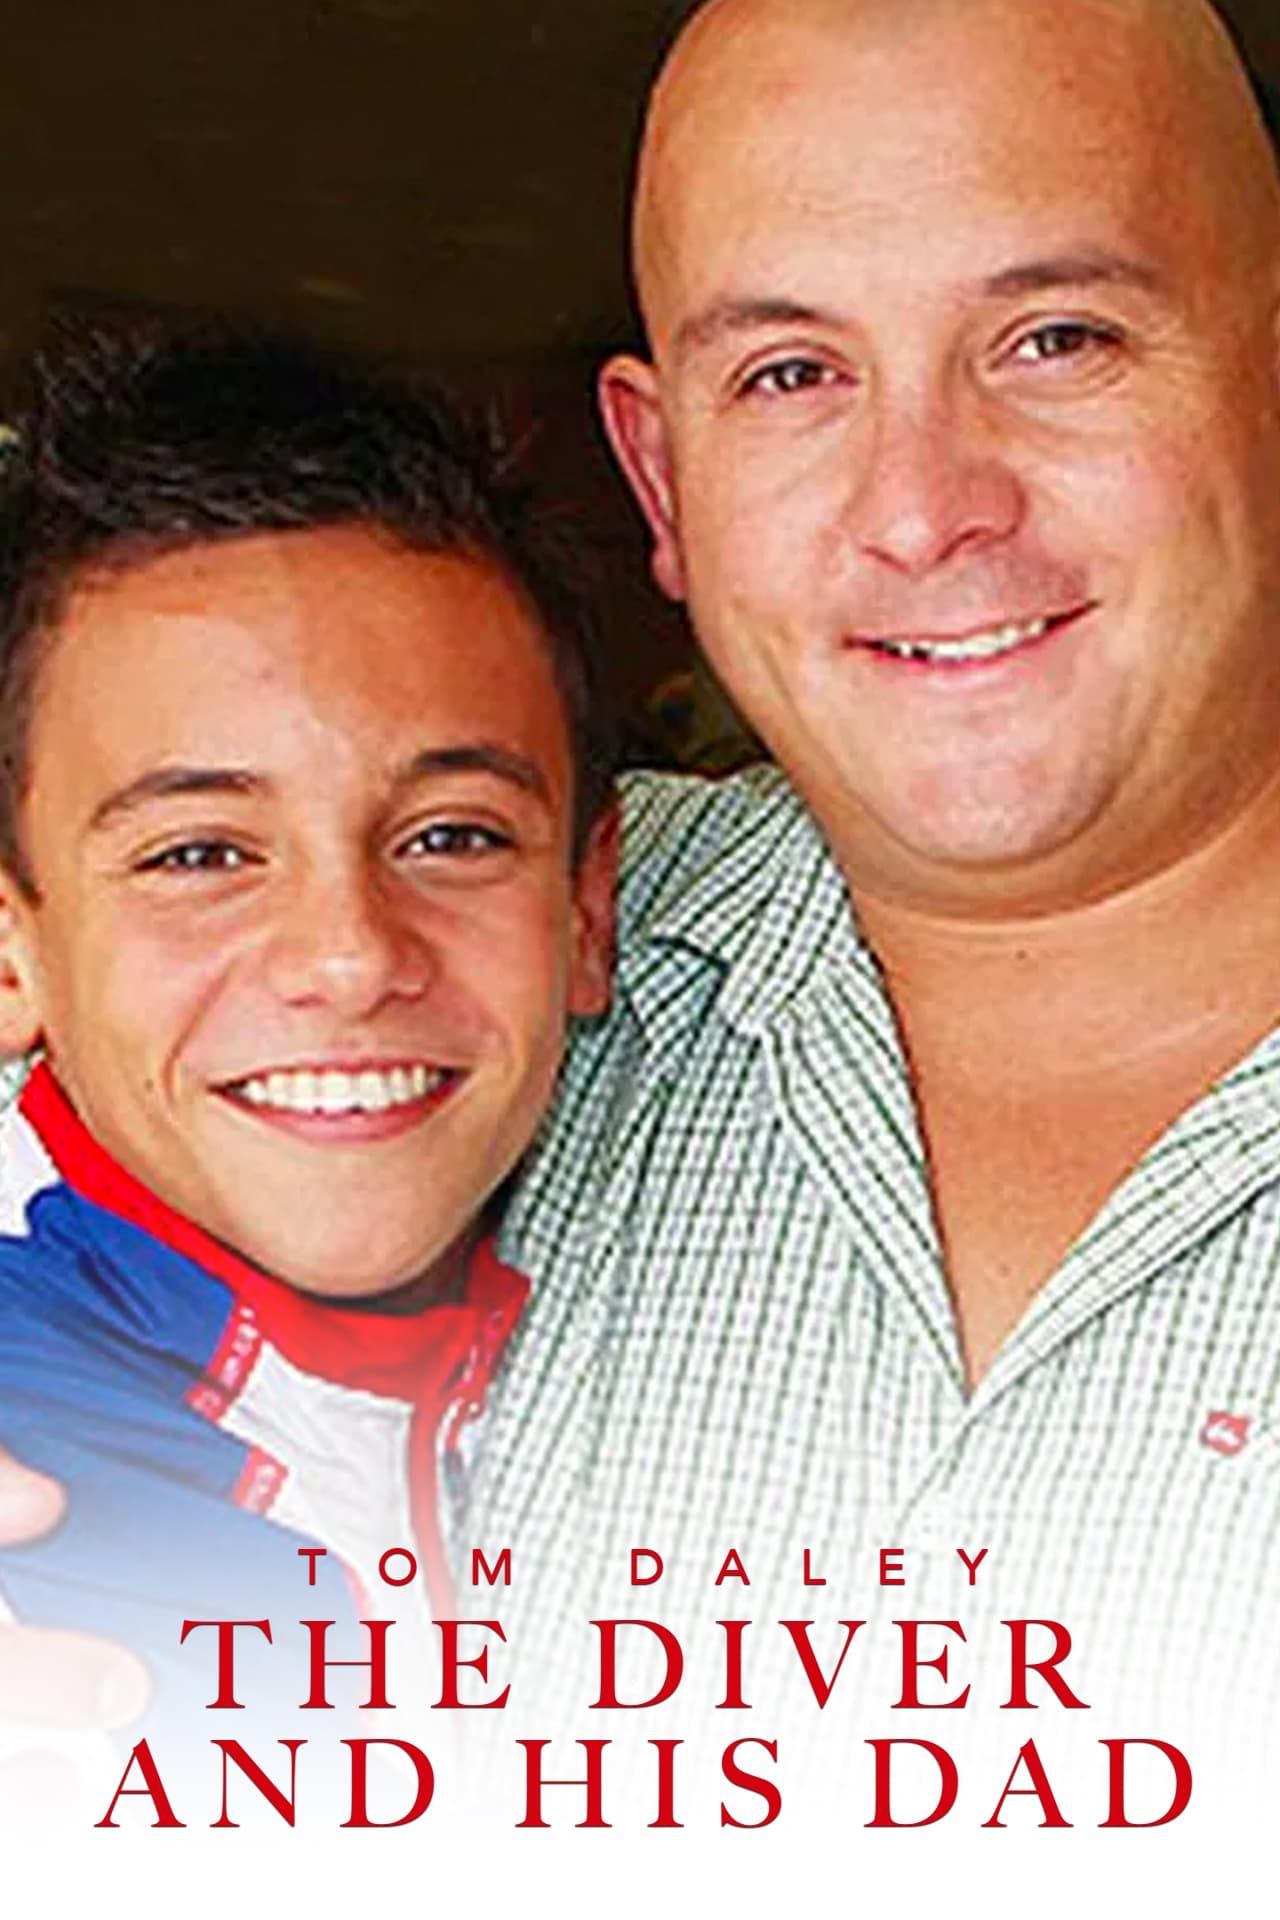 Tom Daley: The Diver and His Dad